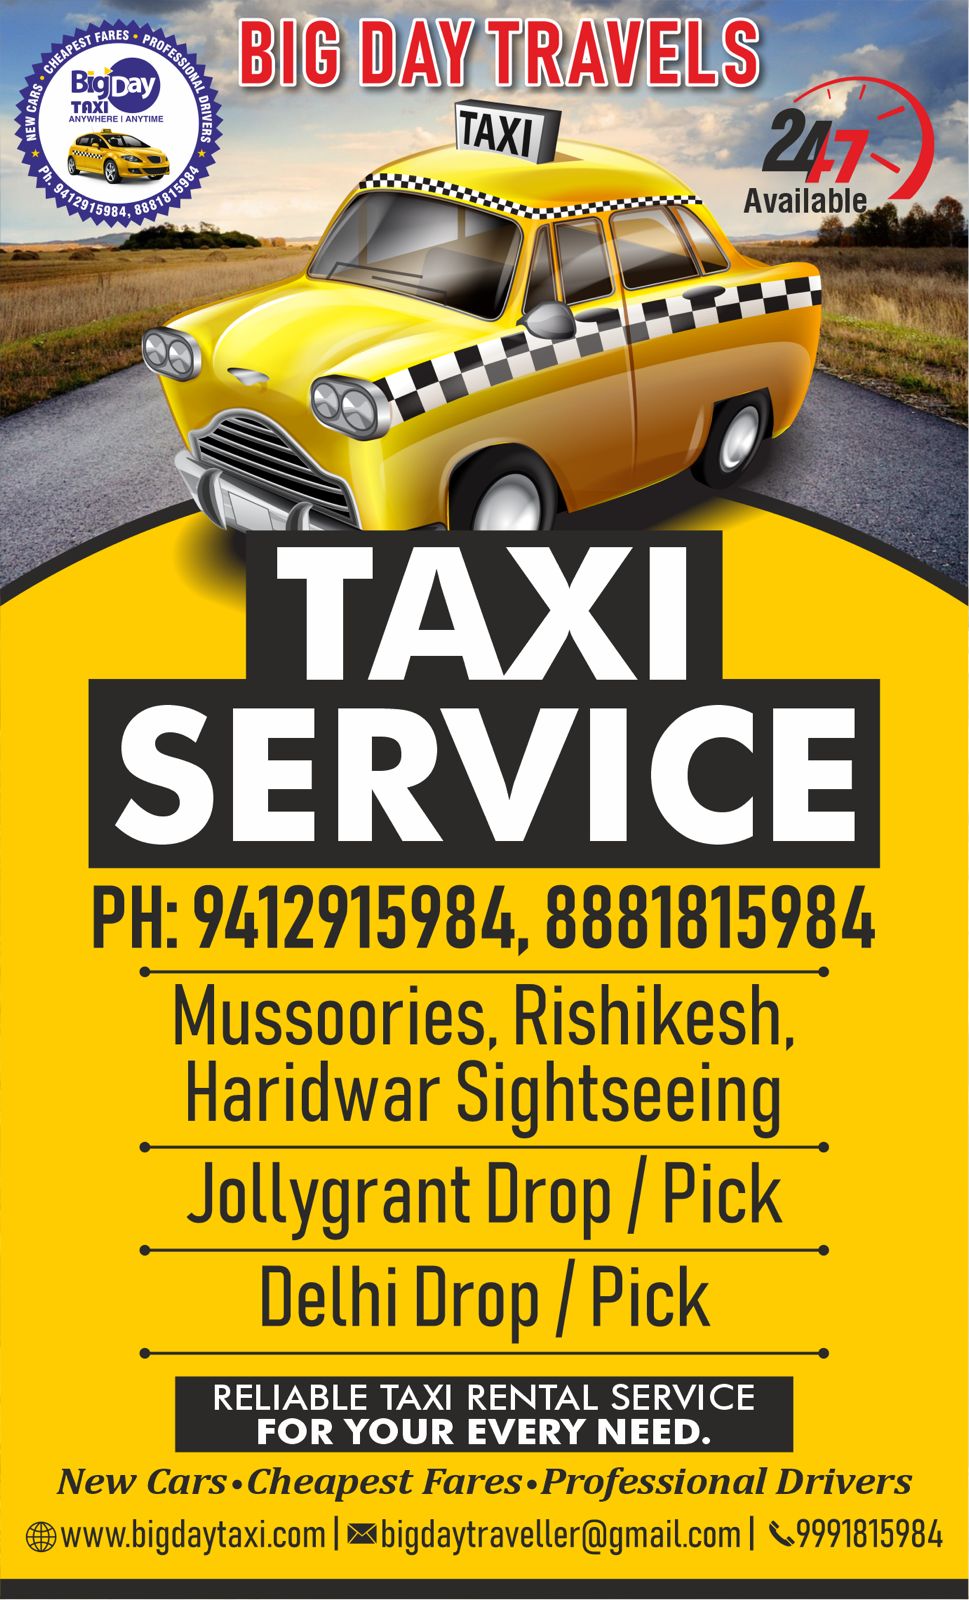 BIG DAY TRAVEL OFFERS TAXIS AT A VERY REASONABLE PRICES - Uttaranchal - Dehra Dun ID1559211